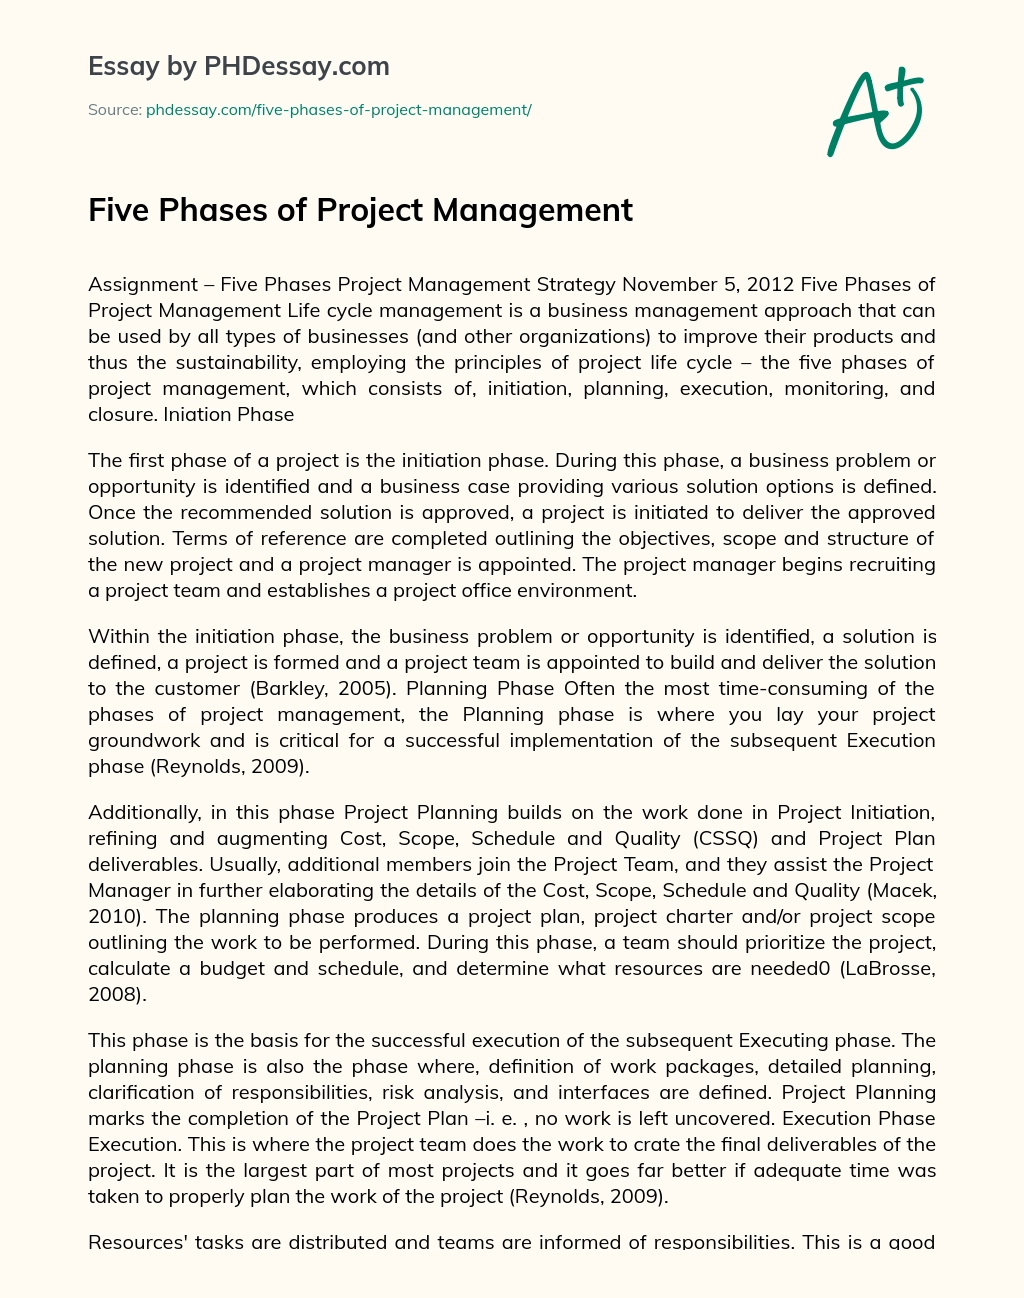 Five Phases of Project Management essay